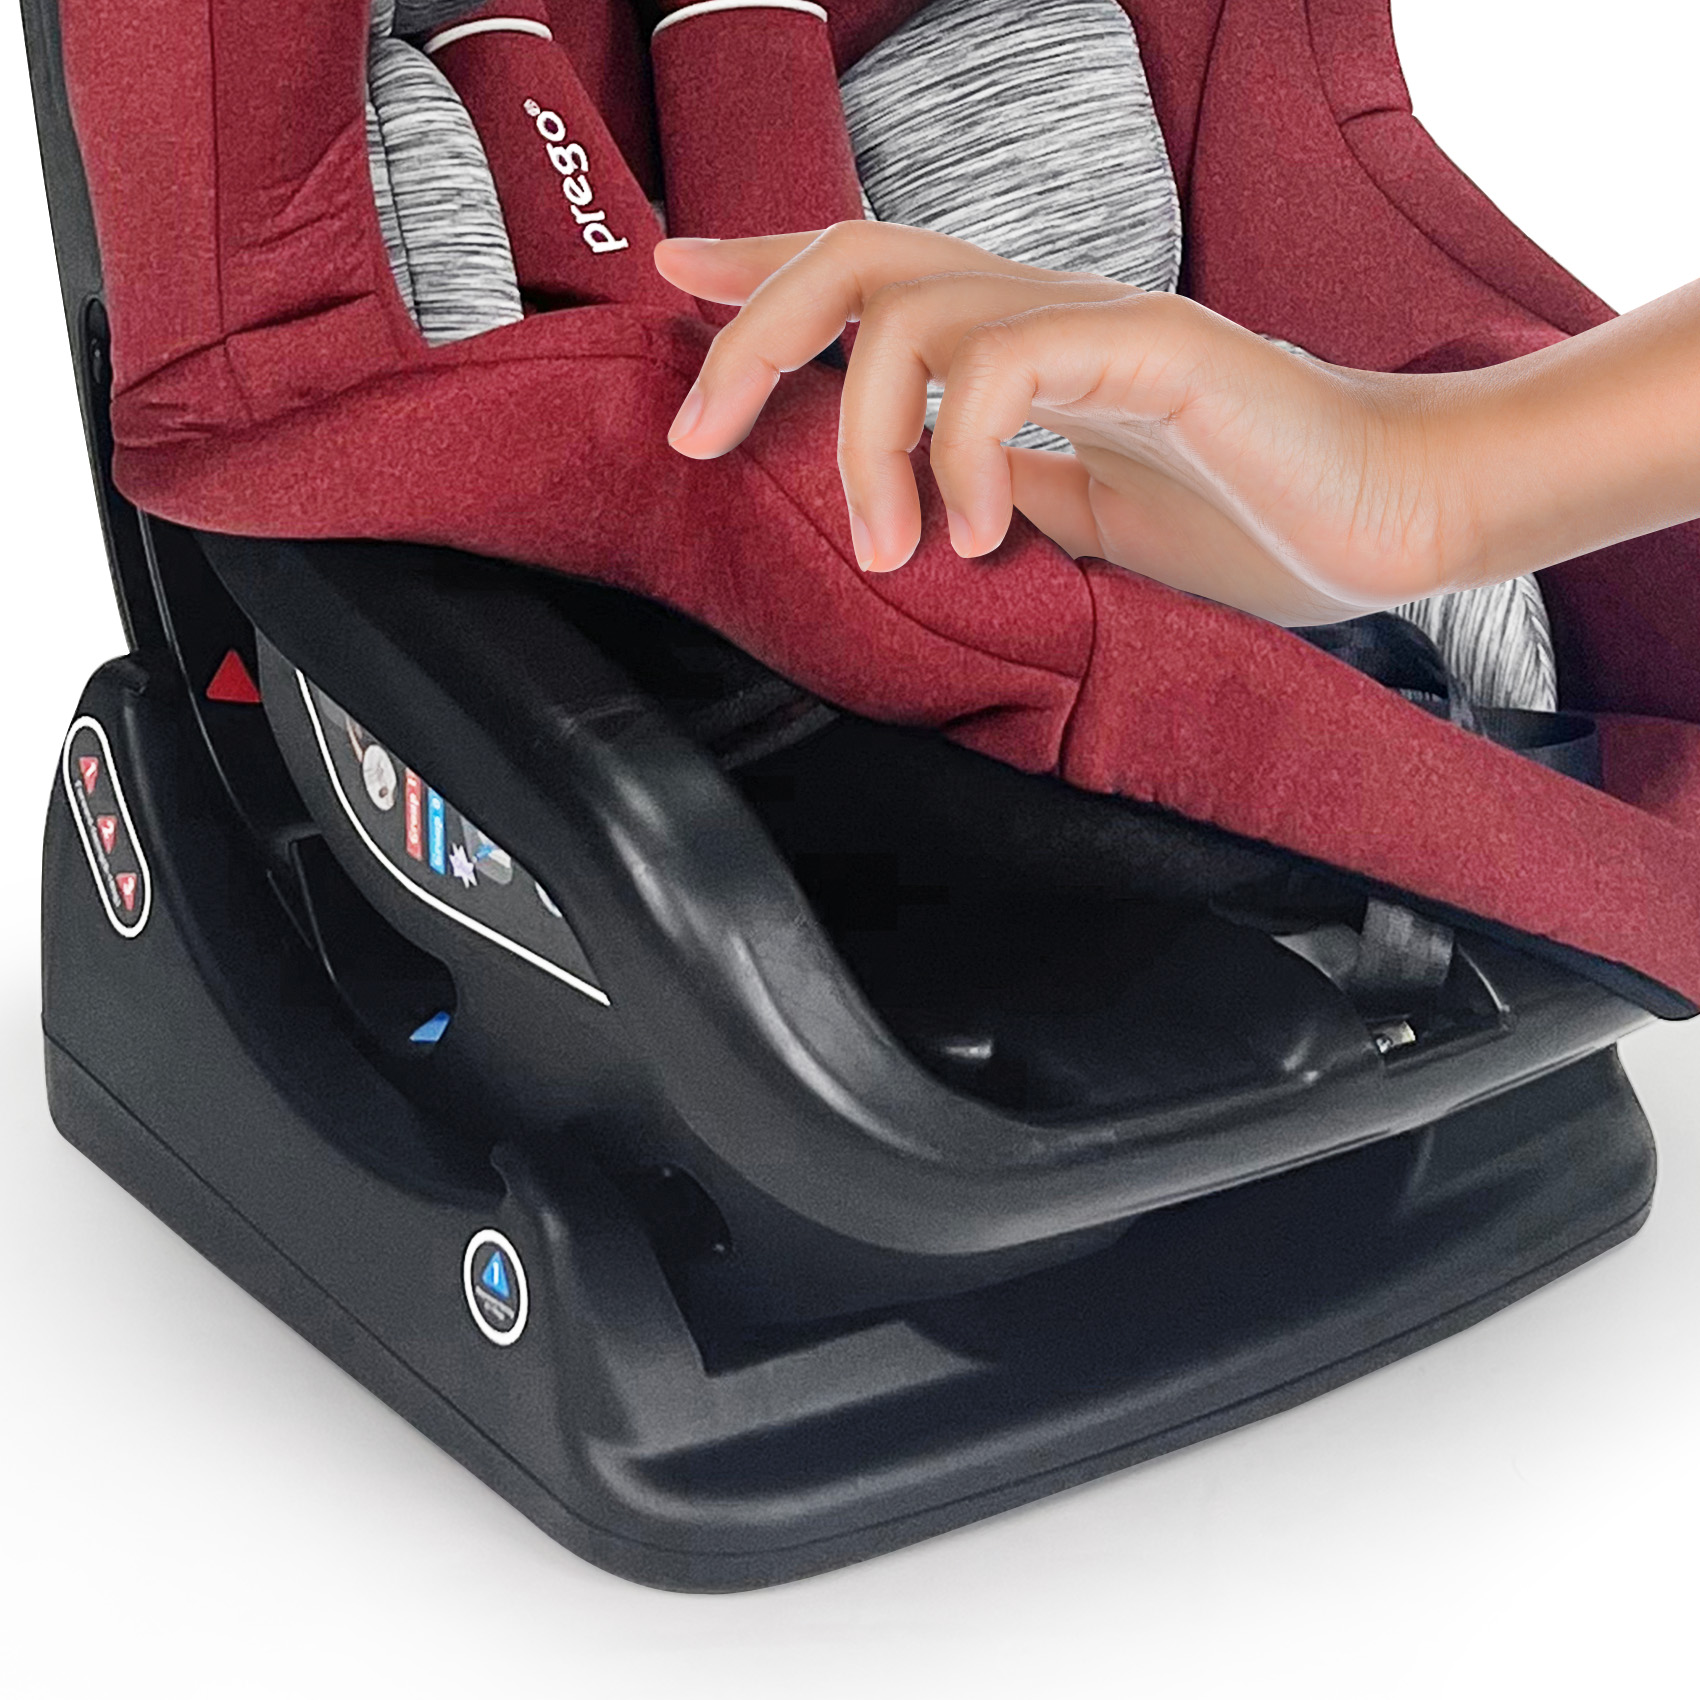 Class 777 Child Safety Car Seat - Prego Baby Official Online Store